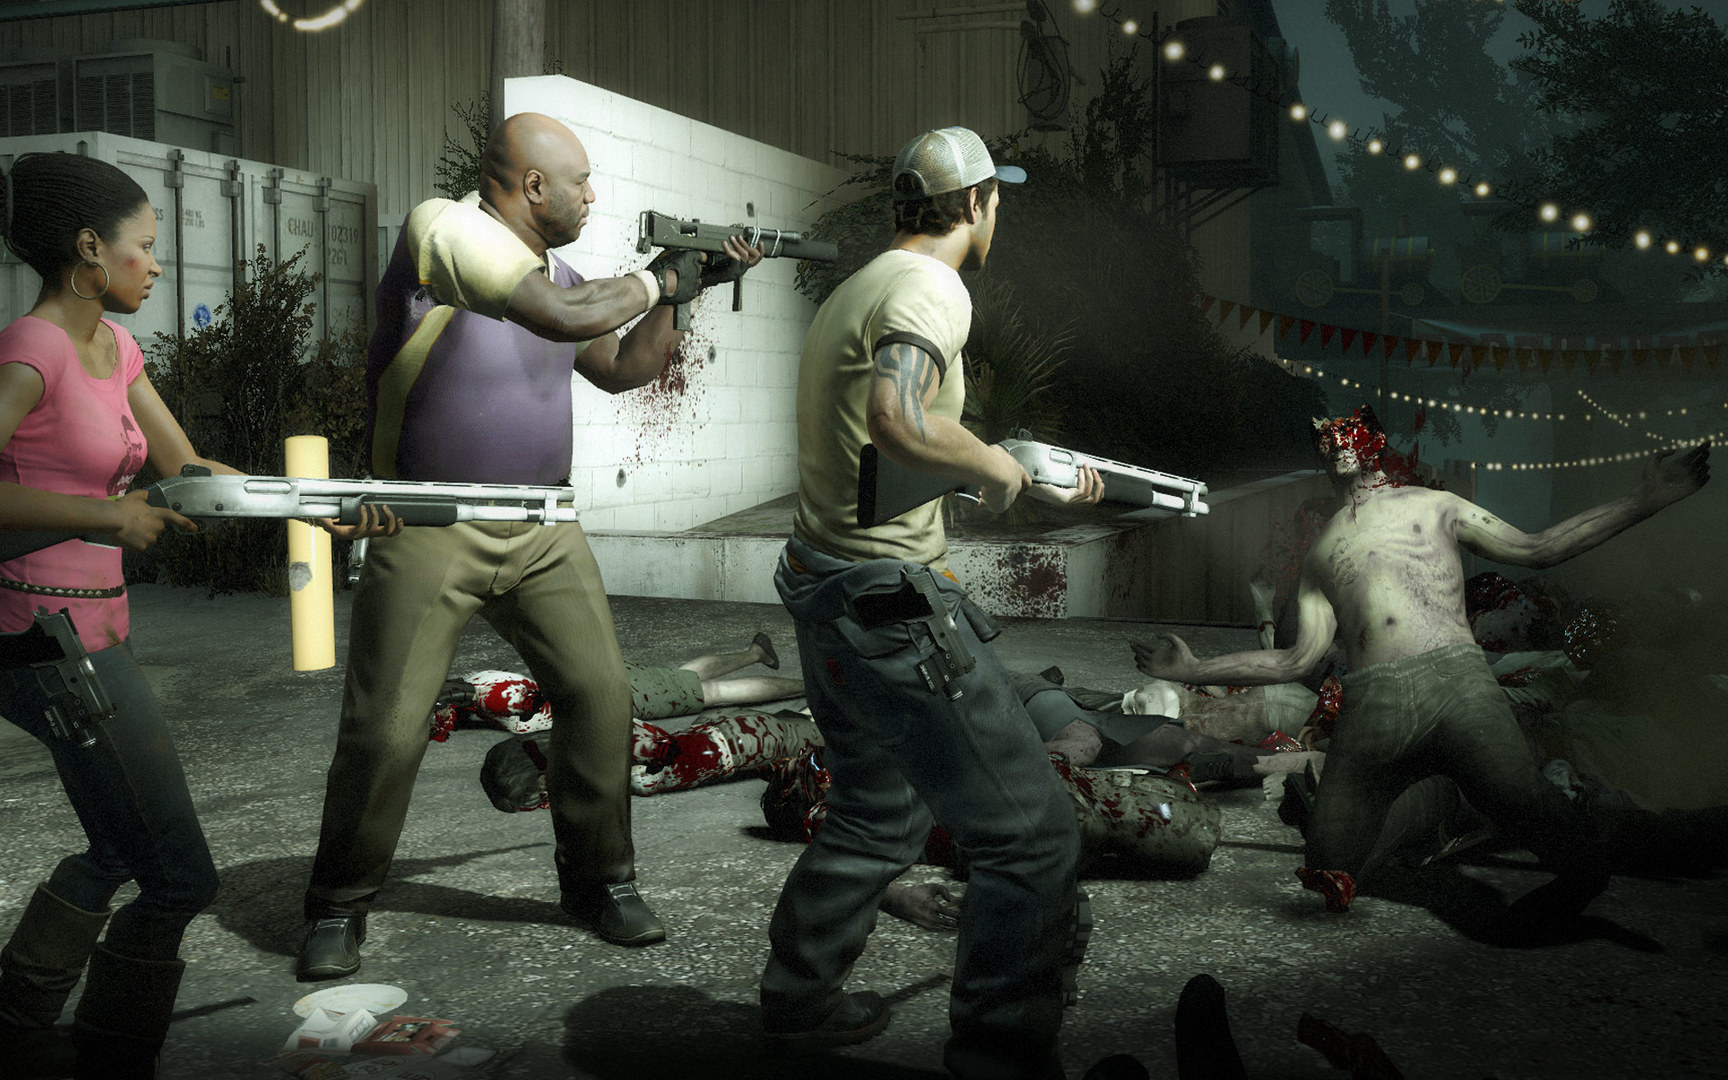 Valve Confirms 'Left 4 Dead' VR Game in Active Development – to VR